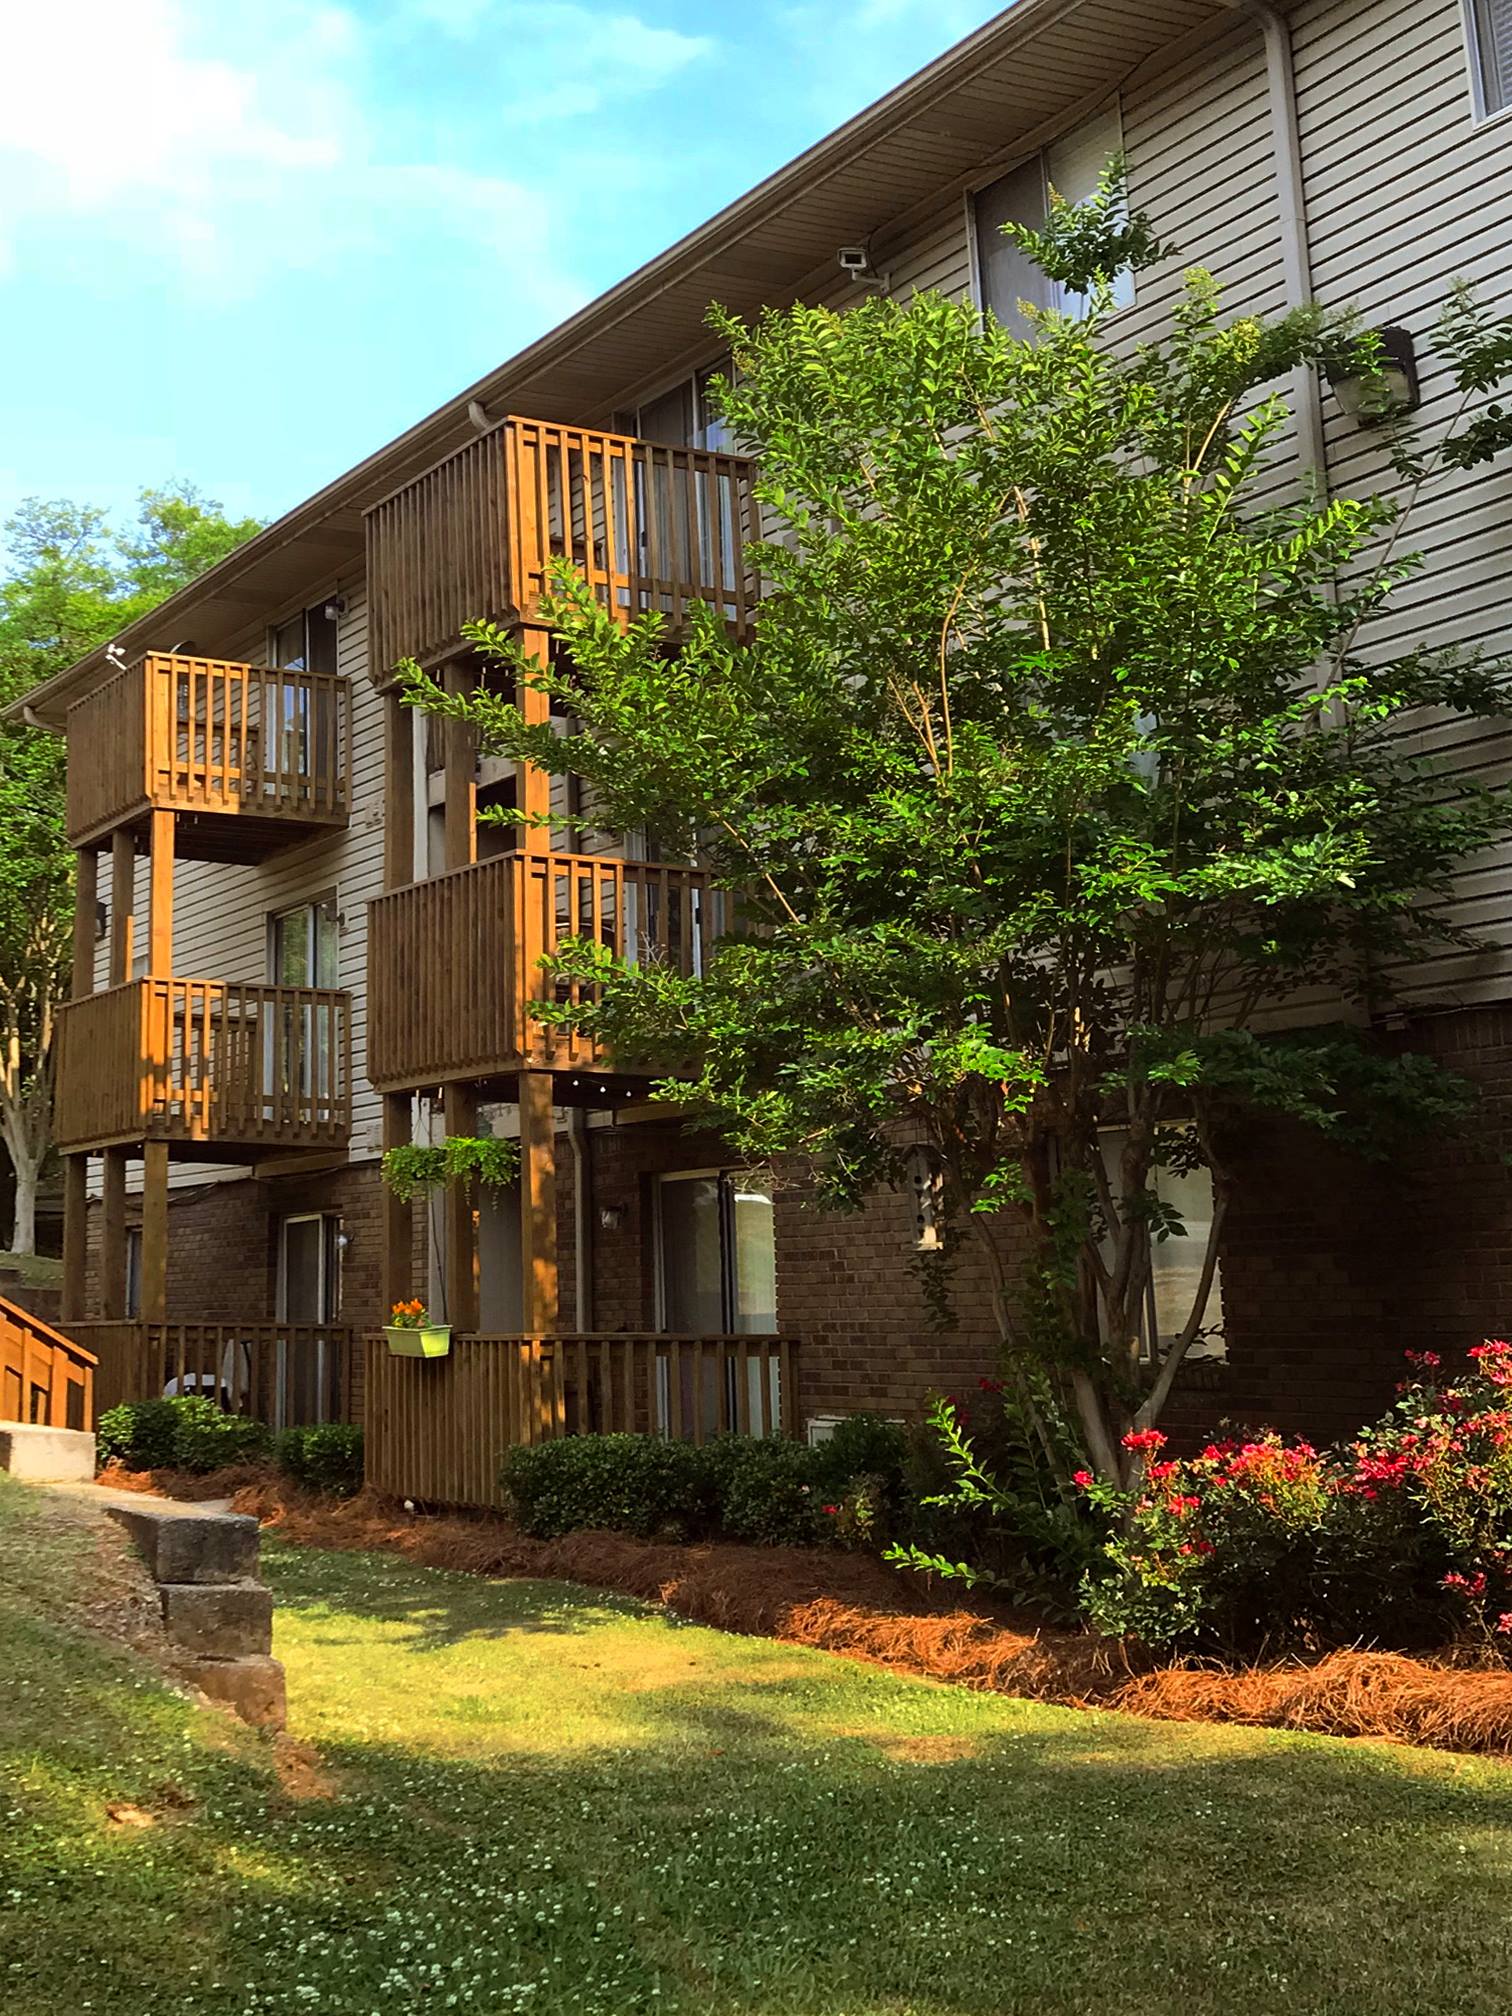 large crepe myrtle trees, flowers, and private patio and balconies